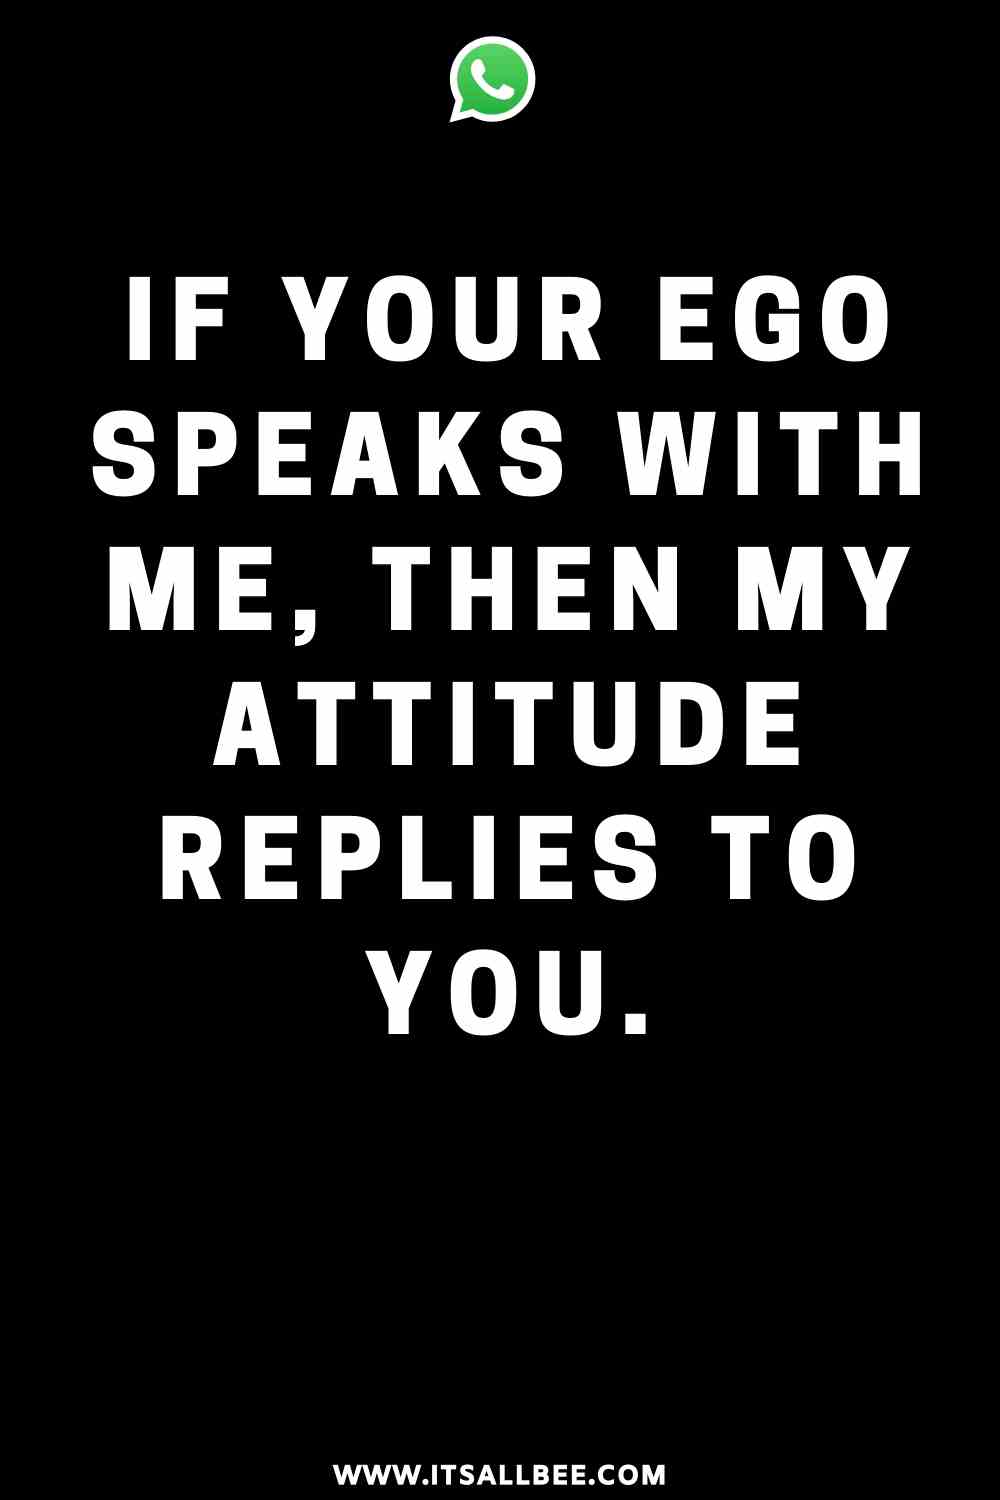 Whatsapp status - if your ego speaks with me, then my attitude replies to you